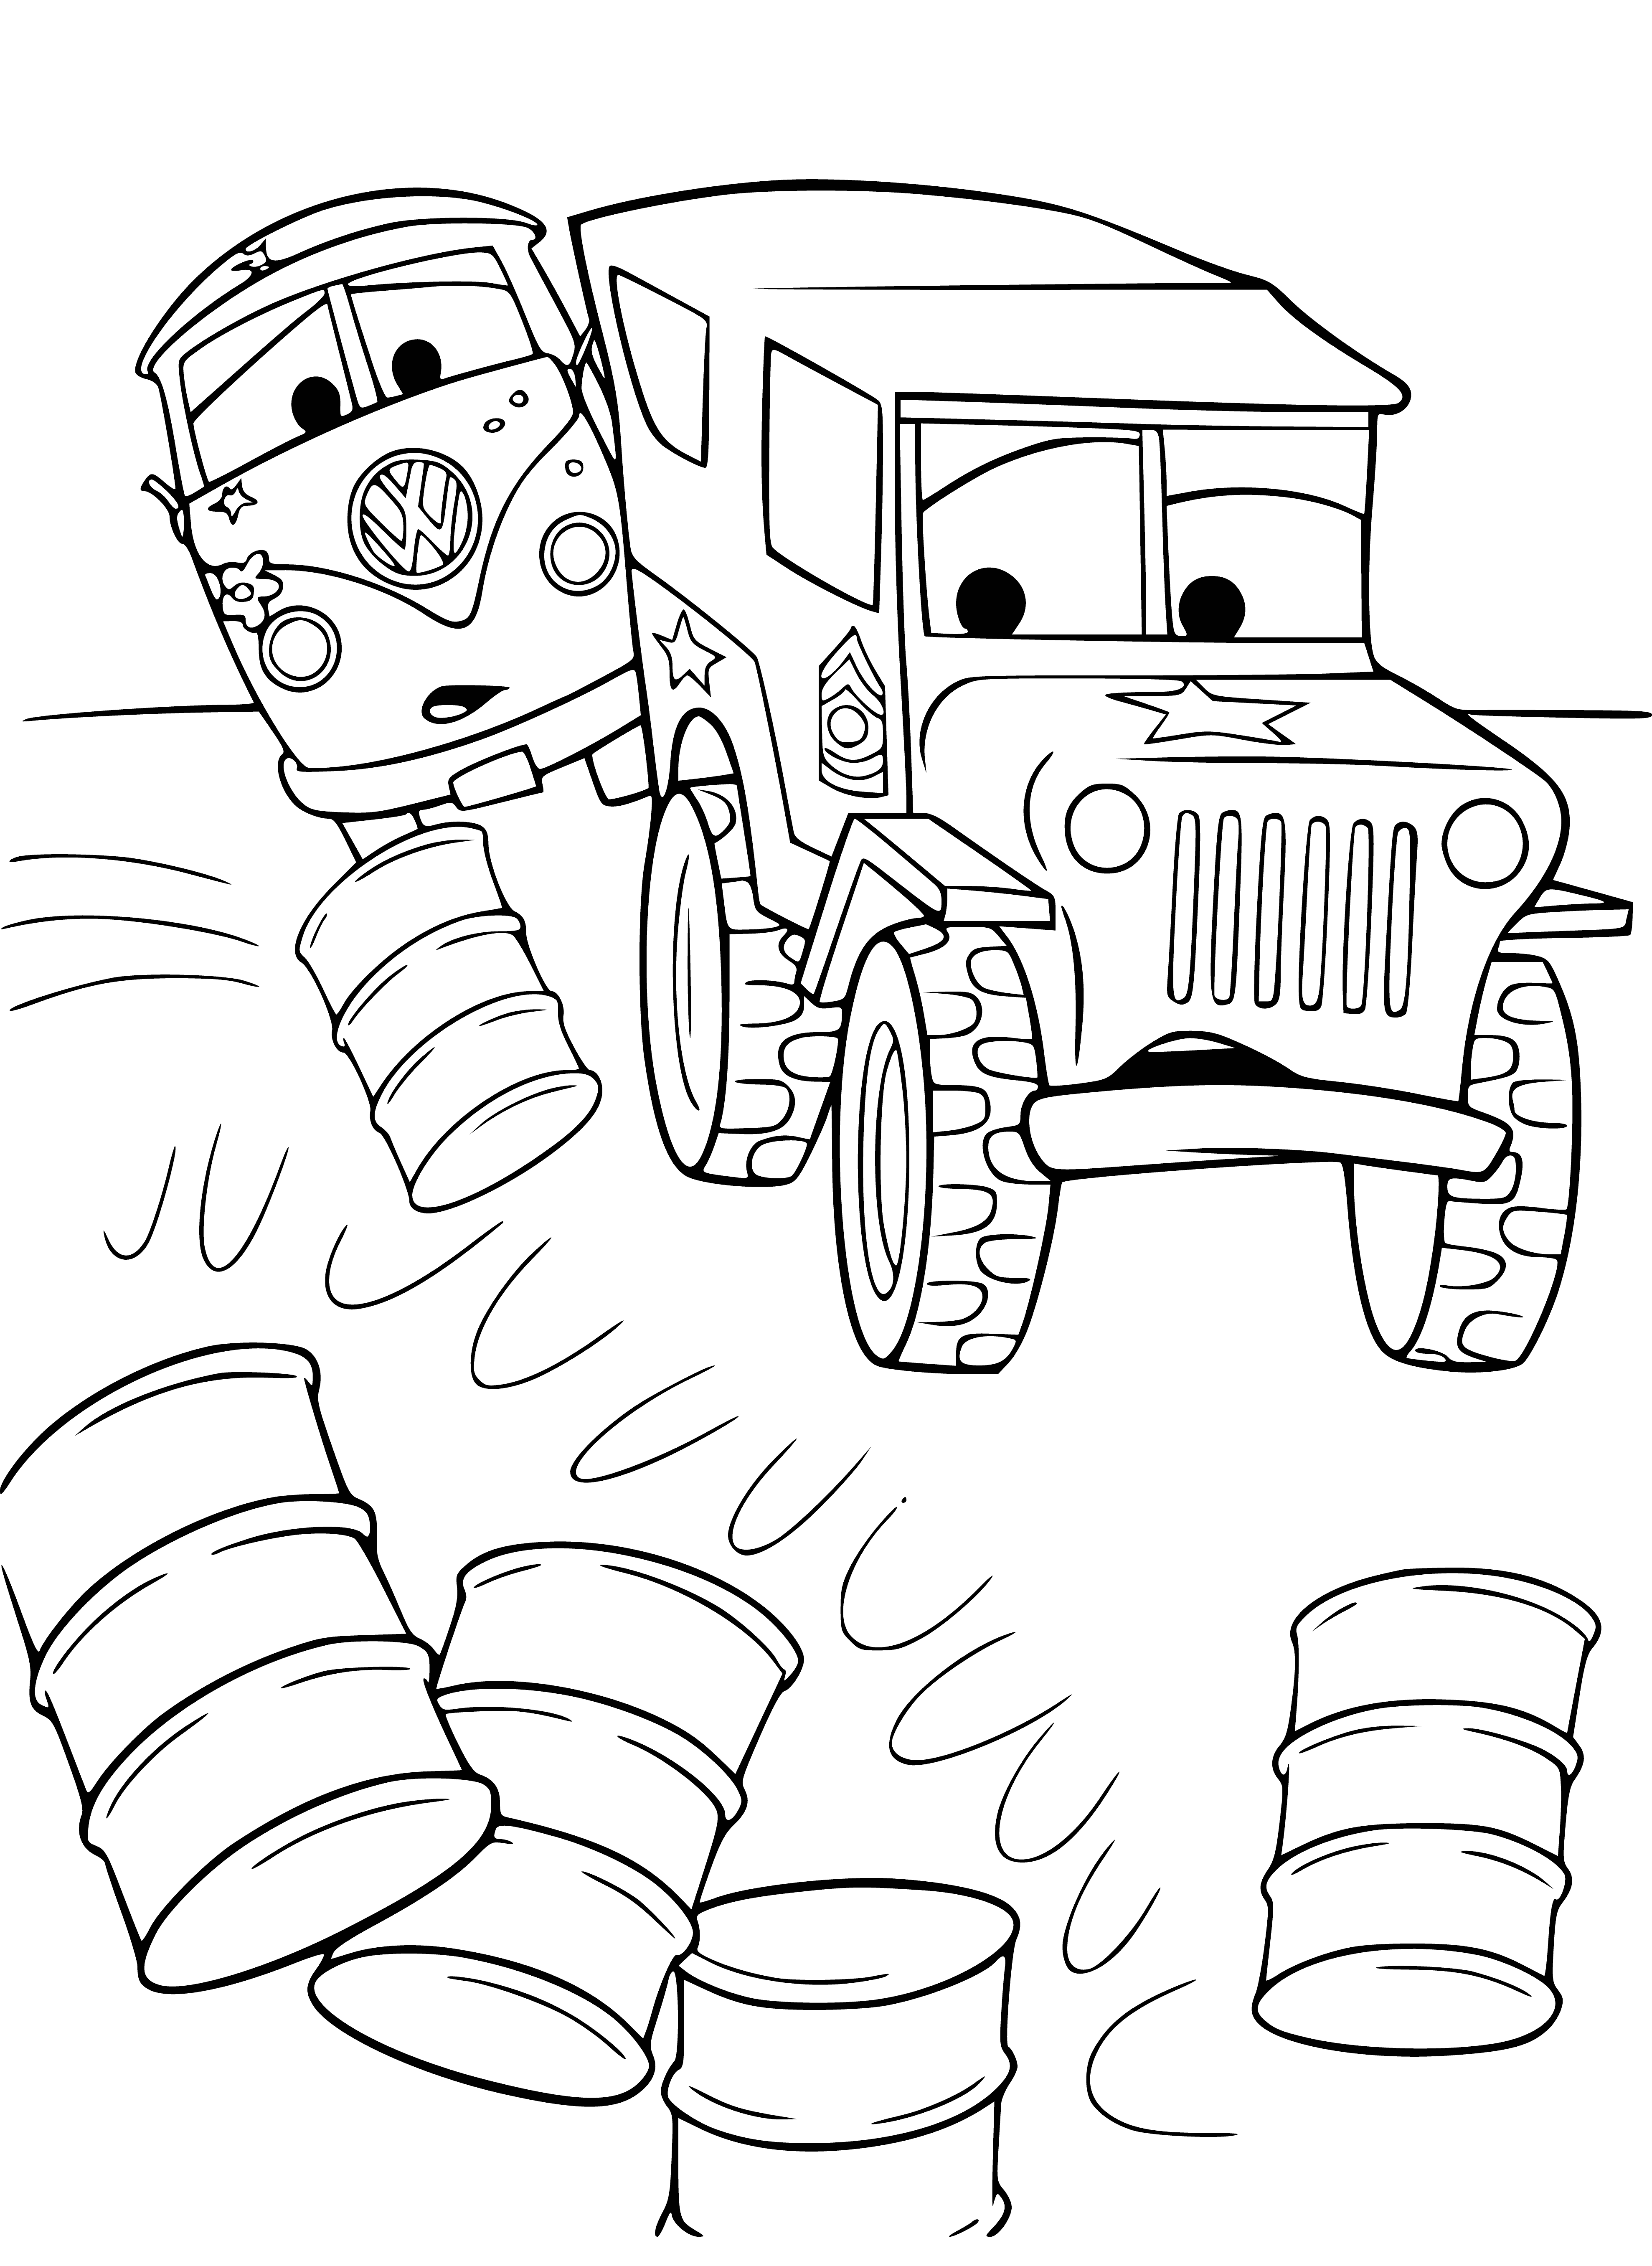 coloring page: Cars in form of barrels & machine in a line; red, white & blue barrels, green & blue machines.